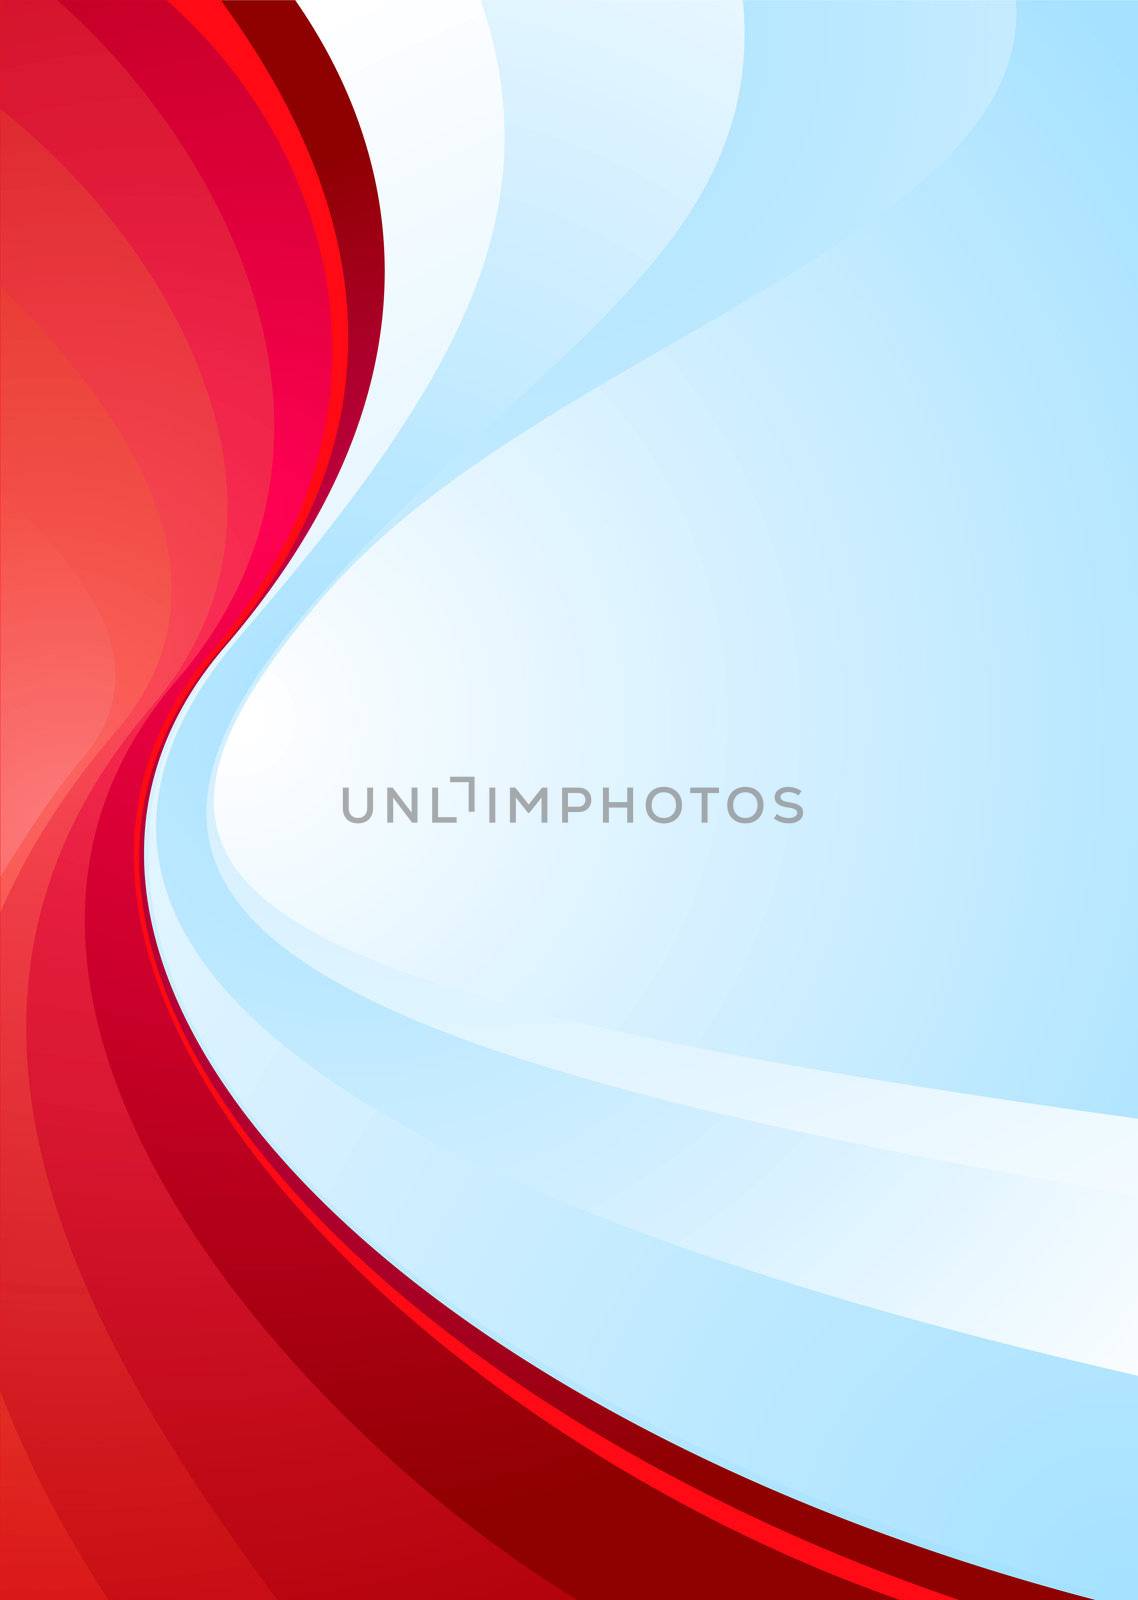 Contrasting colours red and blue make this ideal background